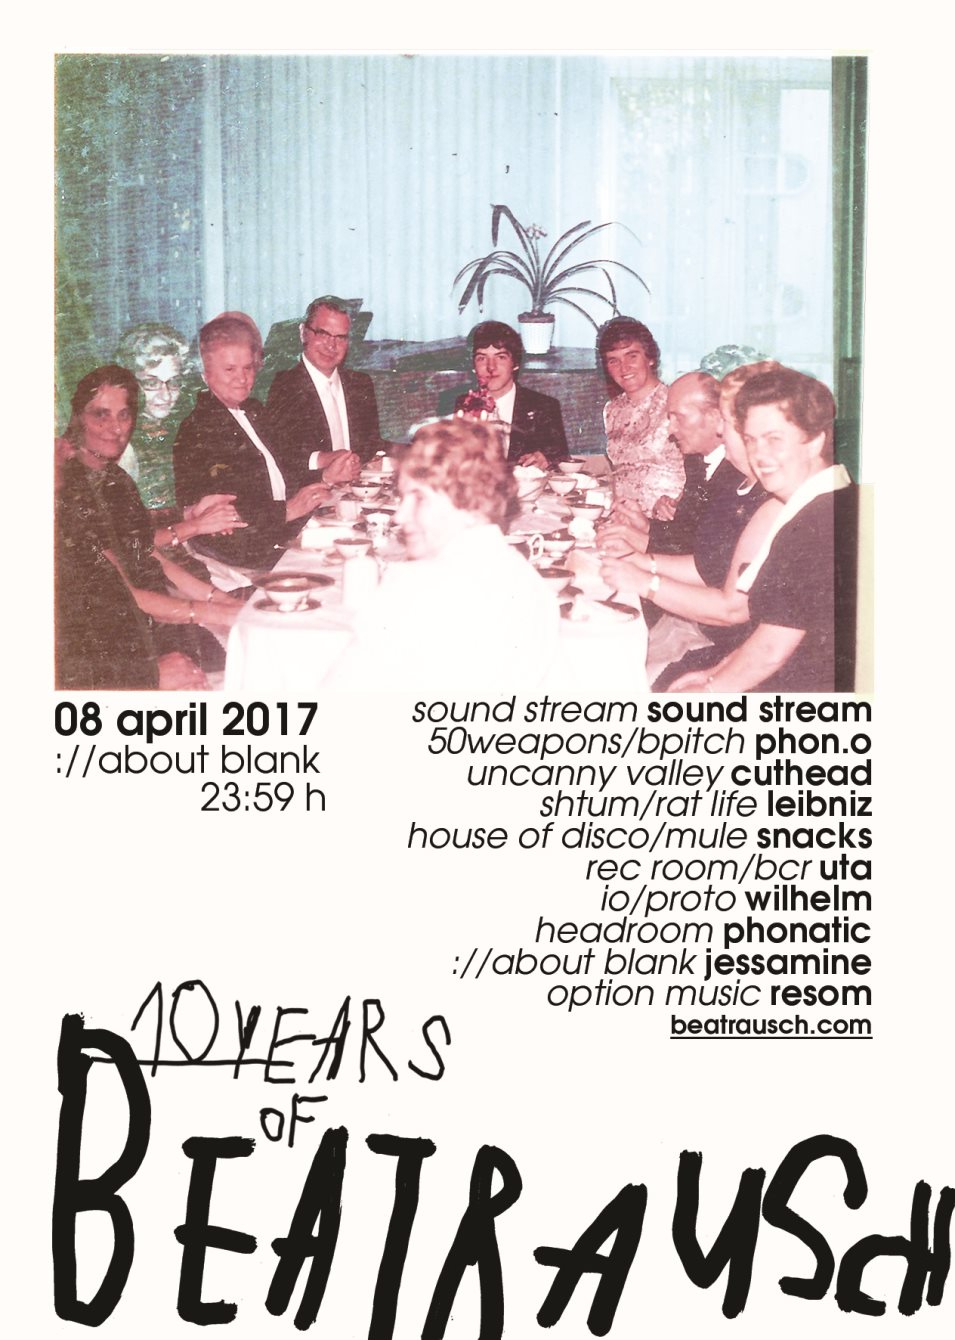 how Soon is now - 10 Years of beatrausch - Flyer front